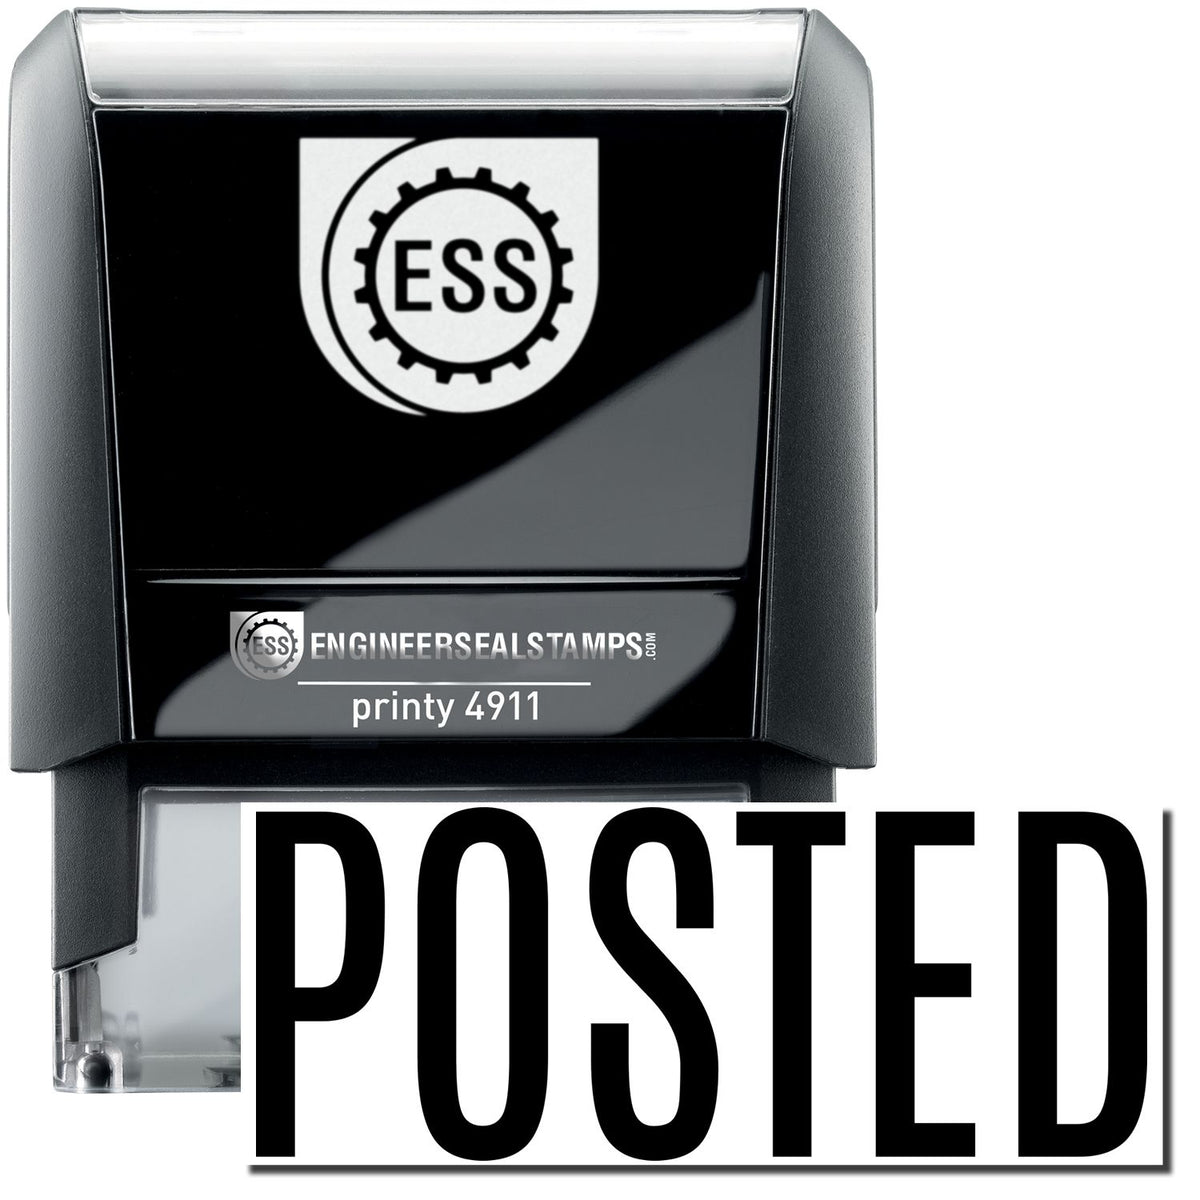 A self-inking stamp with a stamped image showing how the text &quot;POSTED&quot; in a narrow font is displayed after stamping.